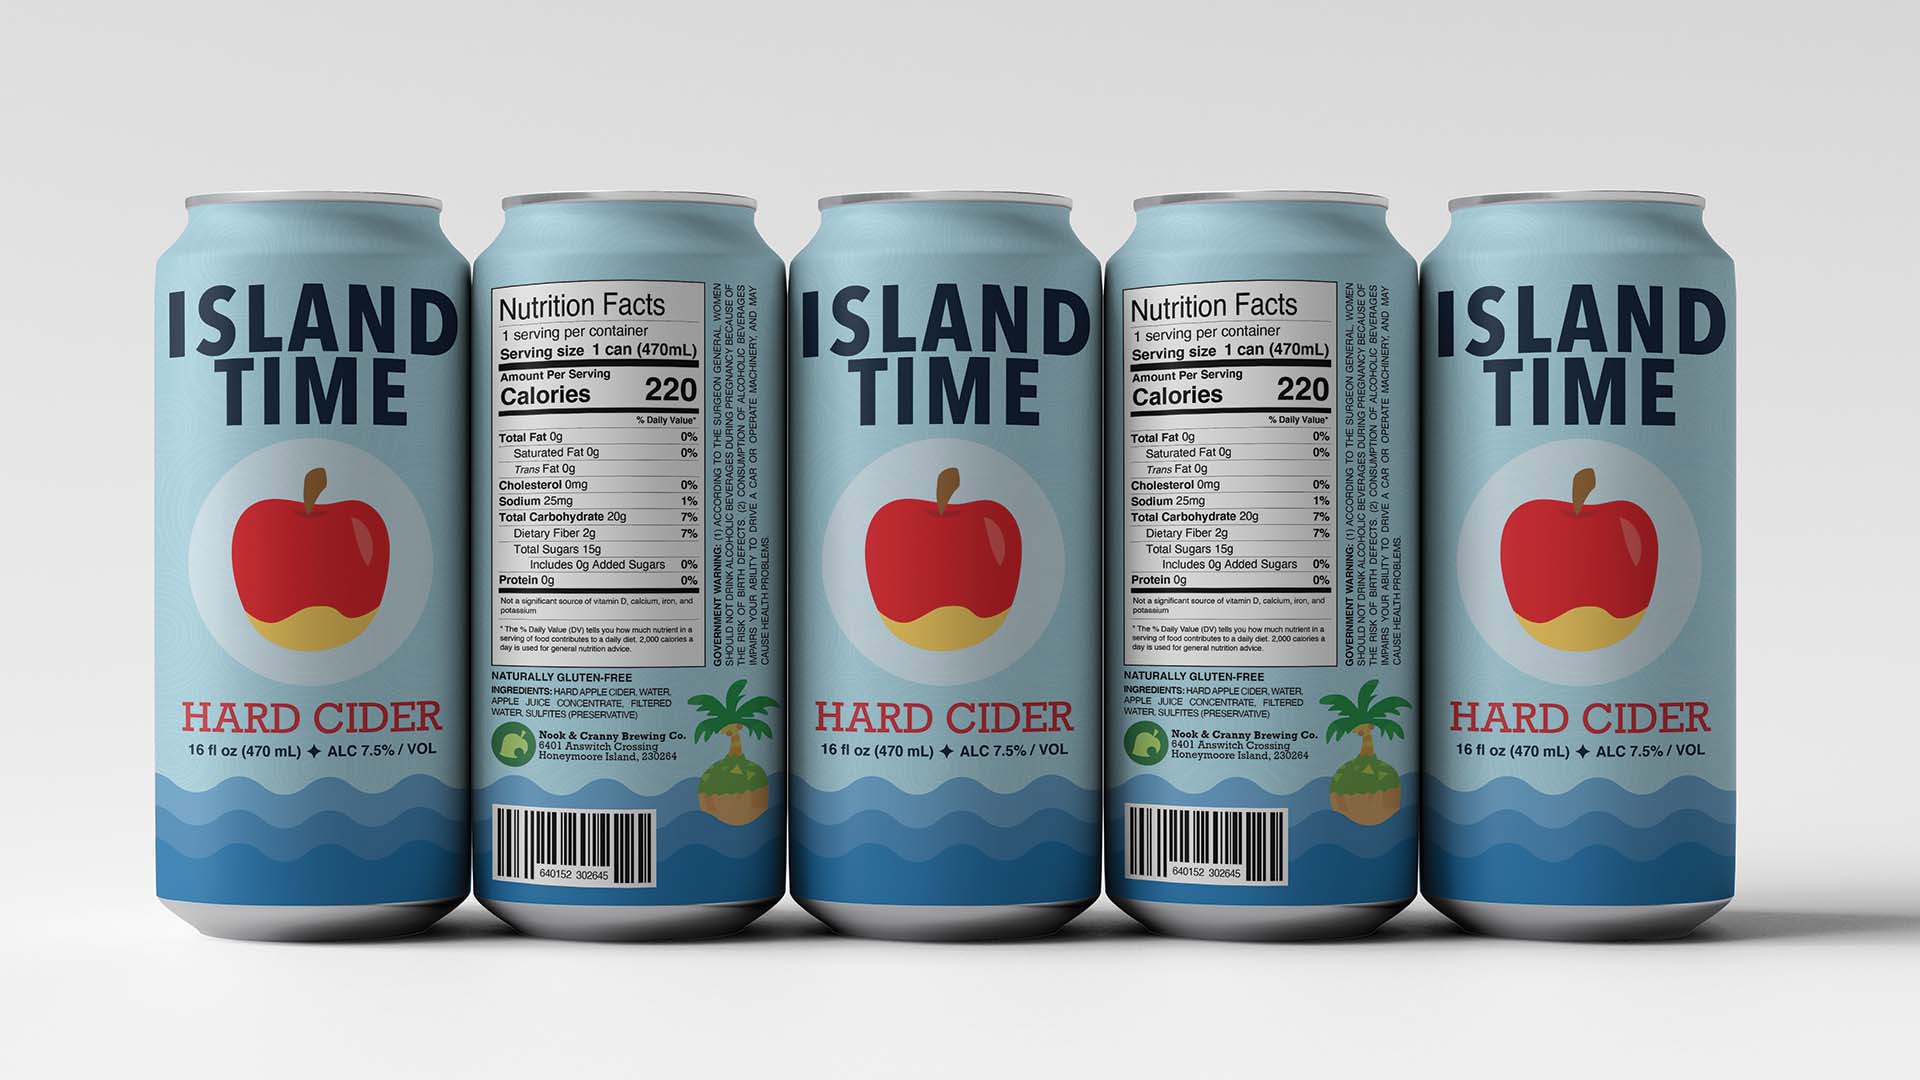  / “Island Time Hard Cider”; Hard Cider Can, 5 x 2.7 x 2.7 inches, metal packaging, 2021. Hard Cider packaging designed to appeal to a younger adult crowd through minimalistic design, soothing colors, and relaxing imagery. 